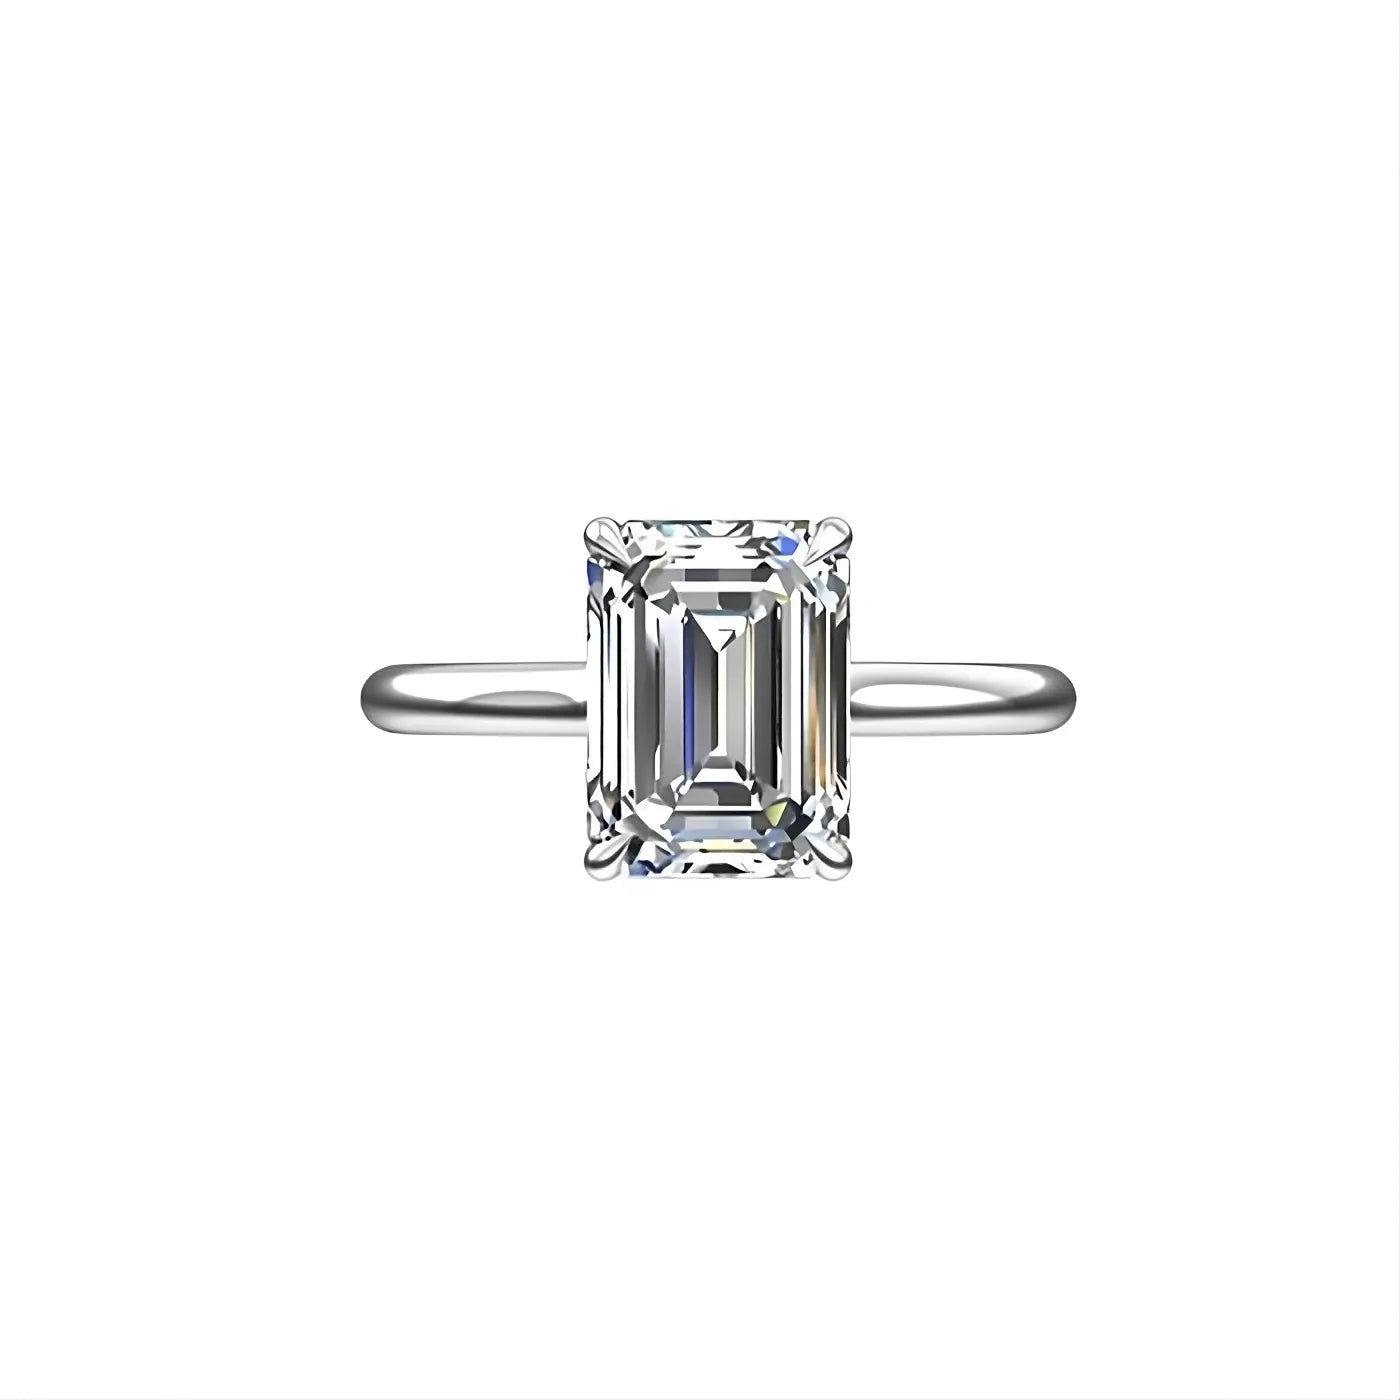 Engagement Ring Low Profile 2 Carat Emerald Cut Solitaire Setting Hidden Halo Thin Band